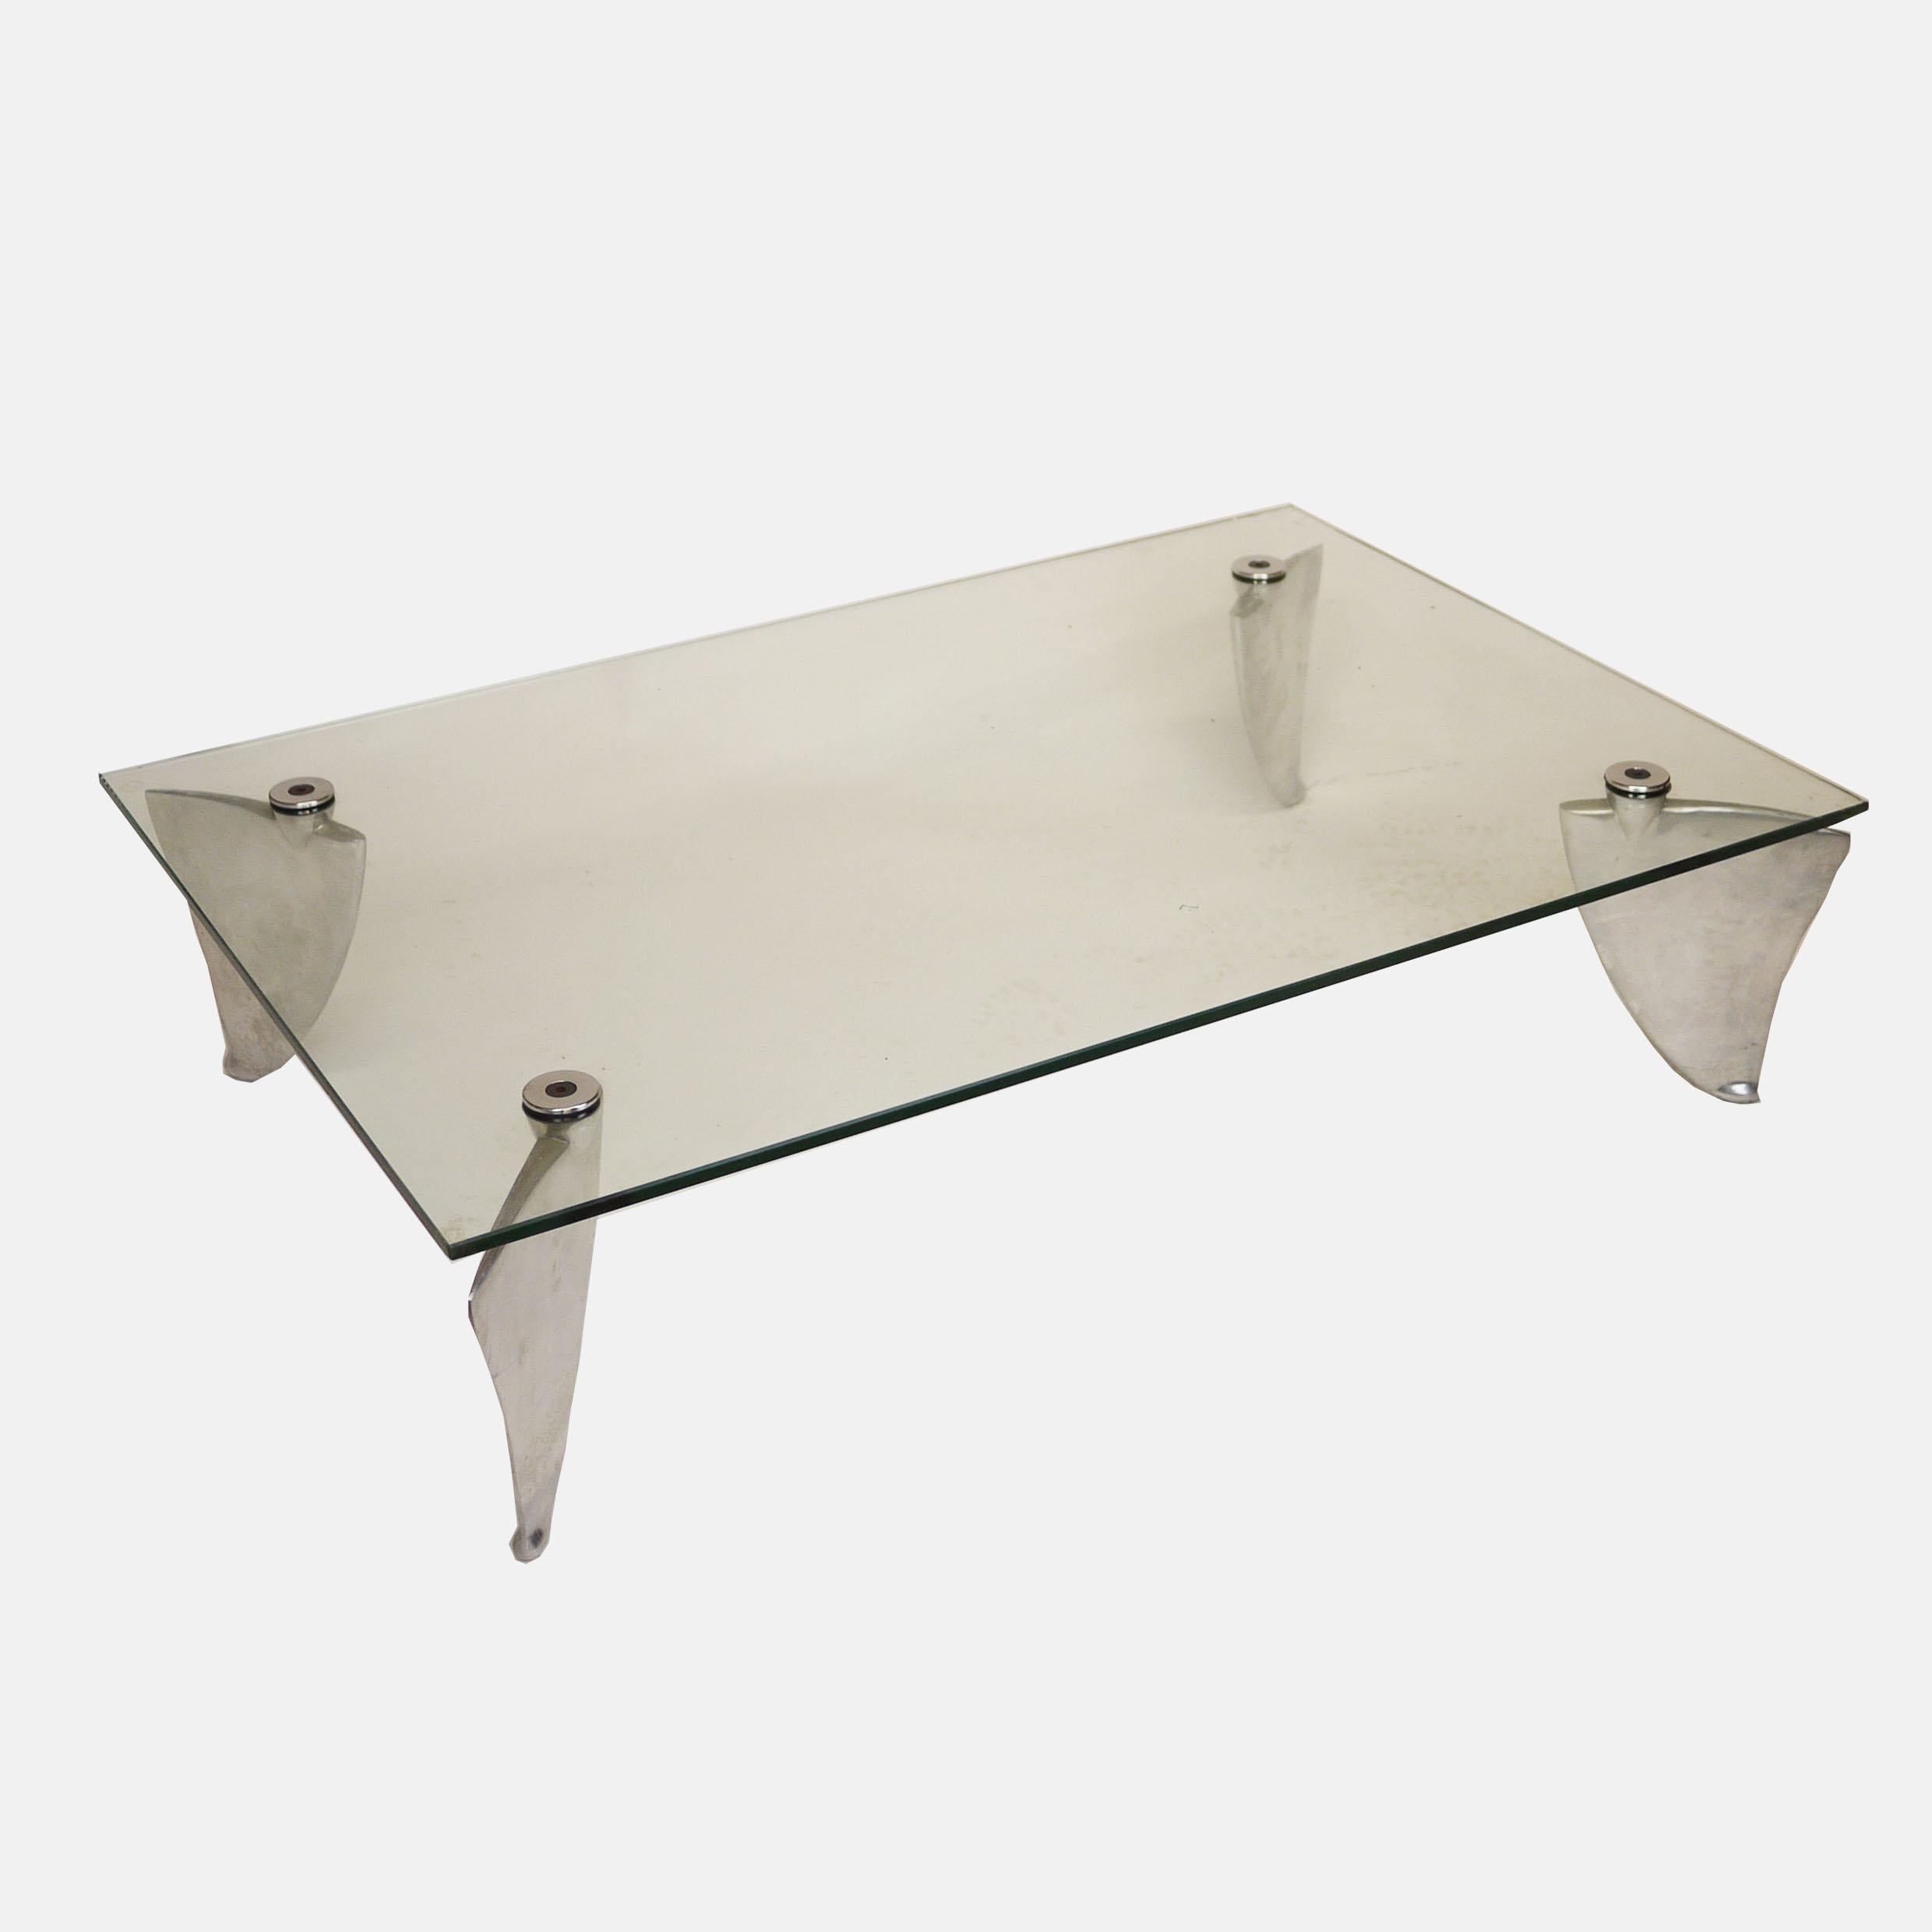 Late 20th Century Vintage Glass and Aluminum 'Fipper' Coffee Table by Matthew Hilton for SCP, 1980 For Sale